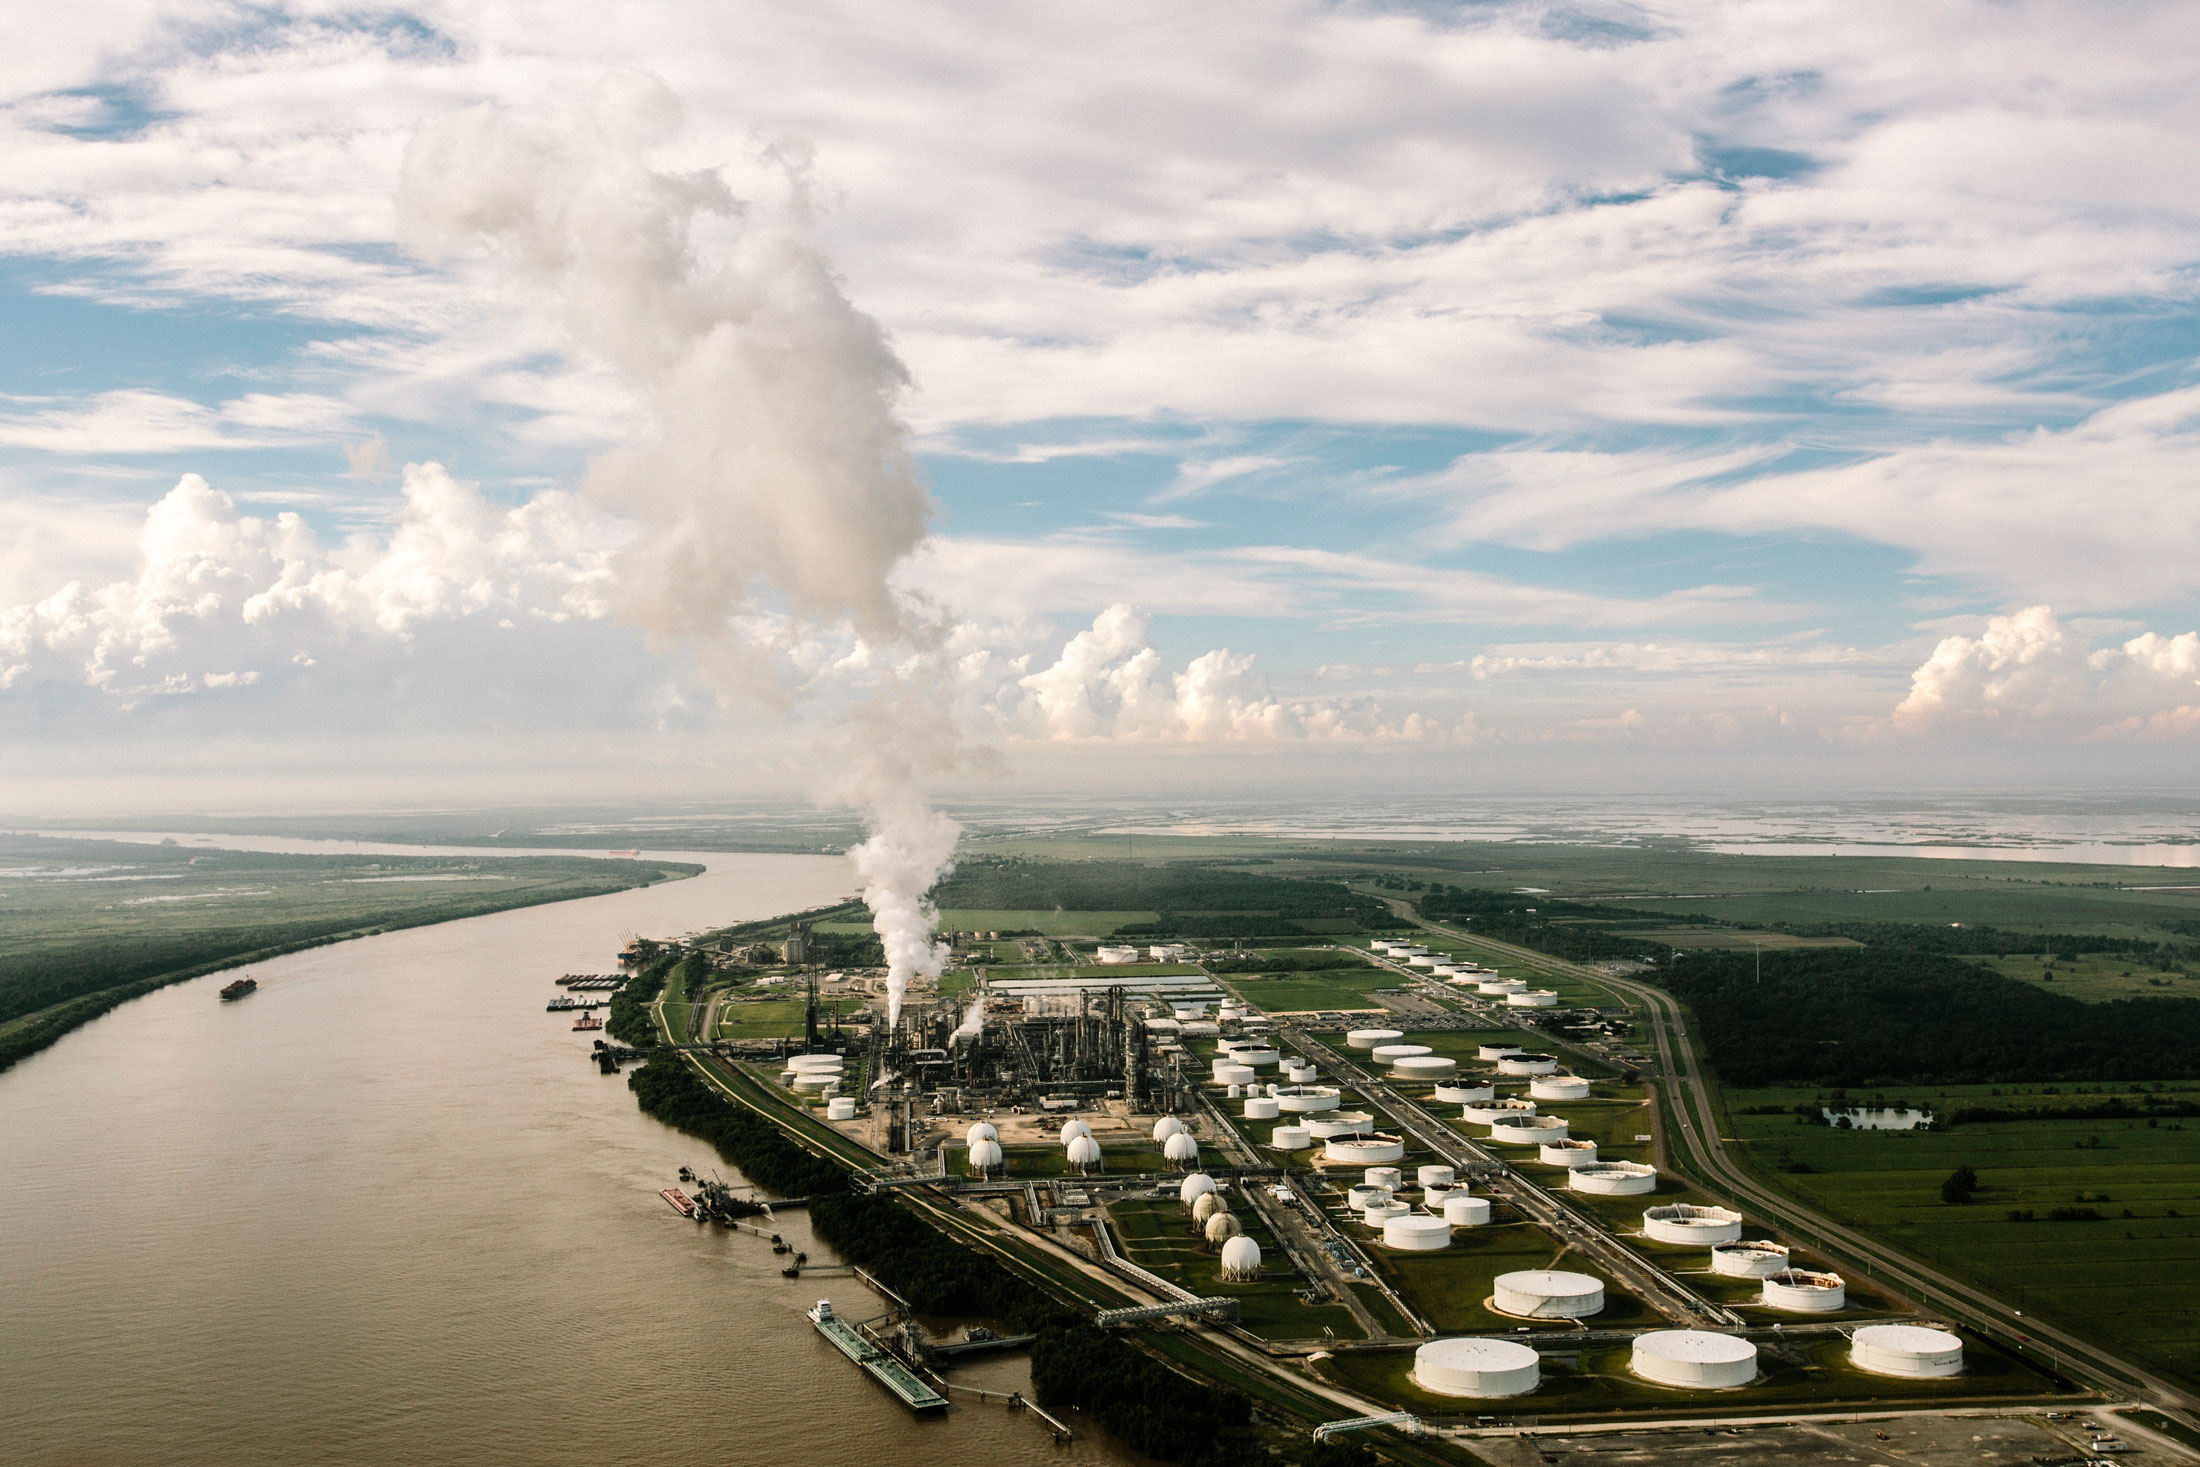 The Phillips 66 oil refinery on the bank of the Mississippi River in Plaquemines Parish, near the Louisiana Coastal Protection and Restoration Authority’s Bayou Dupont Marsh and Ridge Creation.
